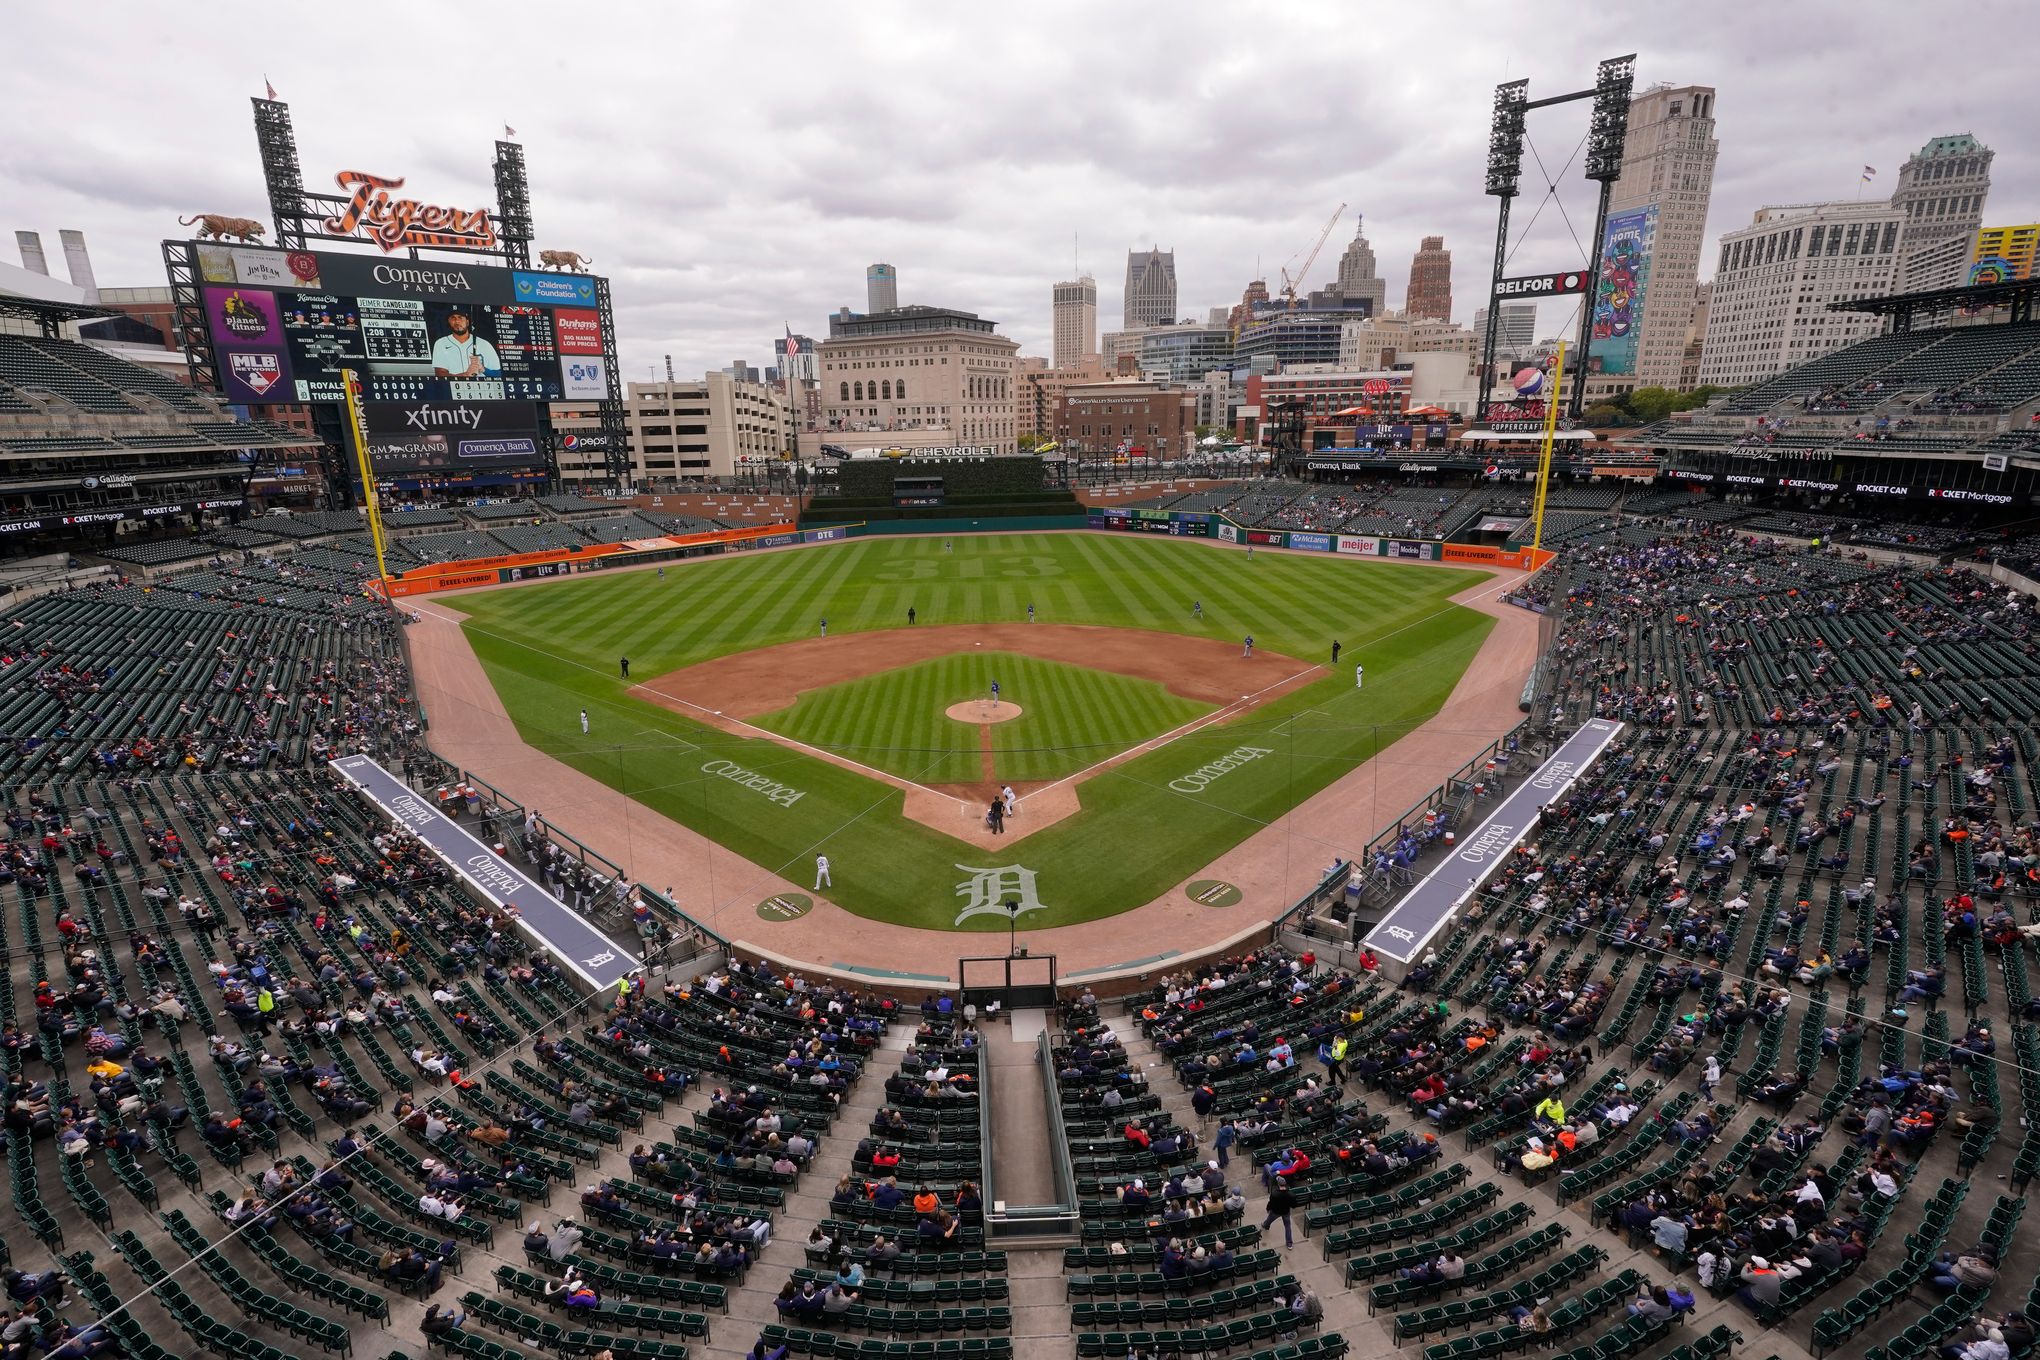 Comerica Park - Home of the Detroit Tigers